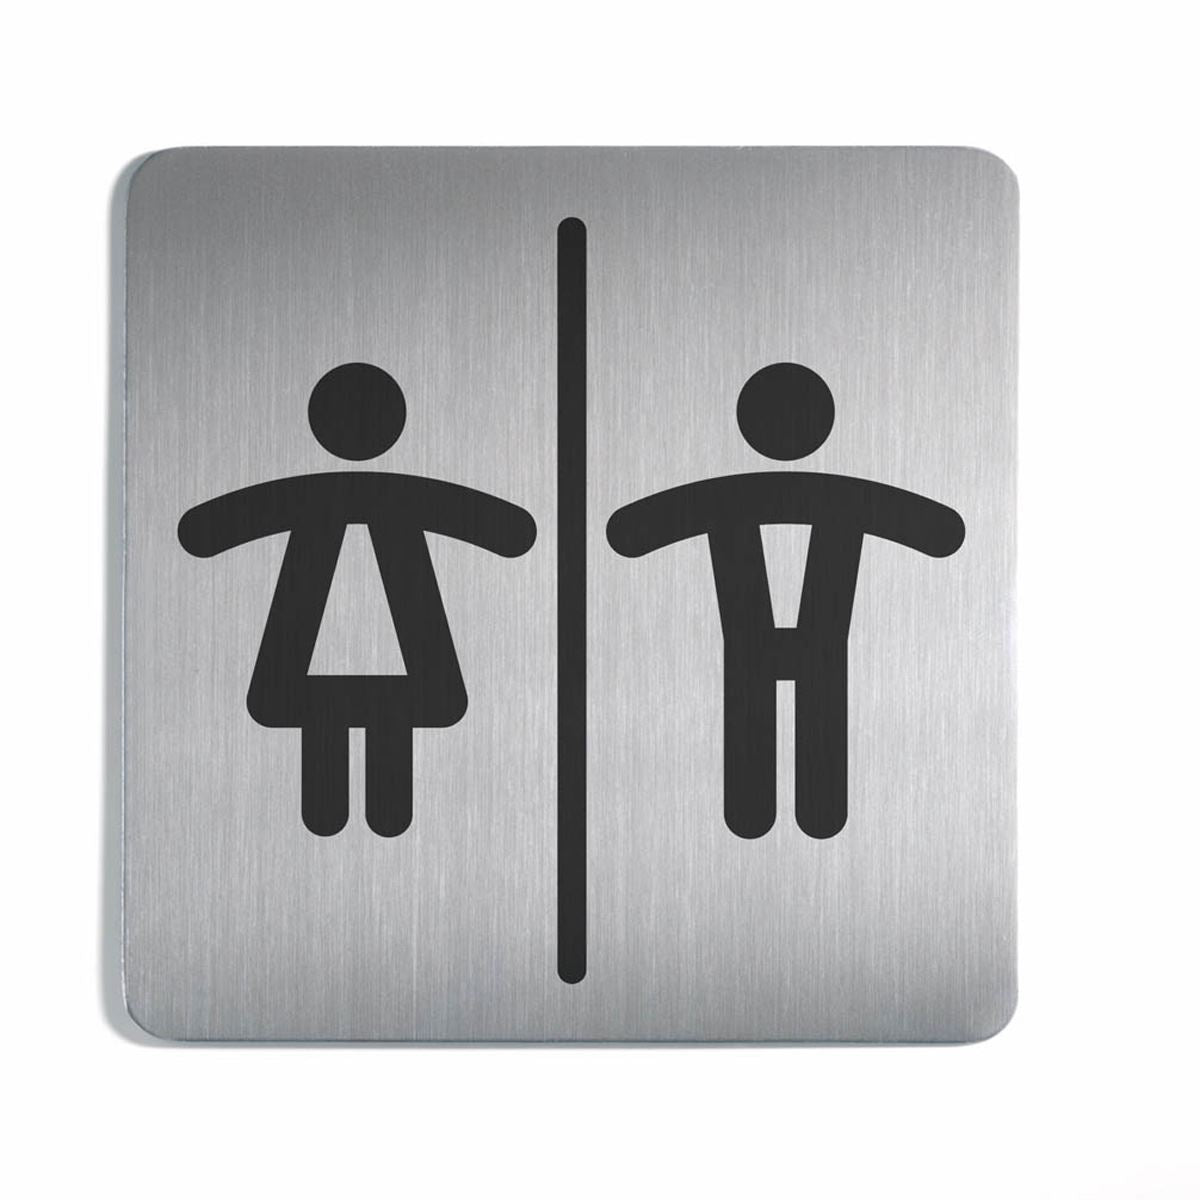 Durable Adhesive Unisex WC Symbol Square Bathroom Toilet Sign | Stainless Steel